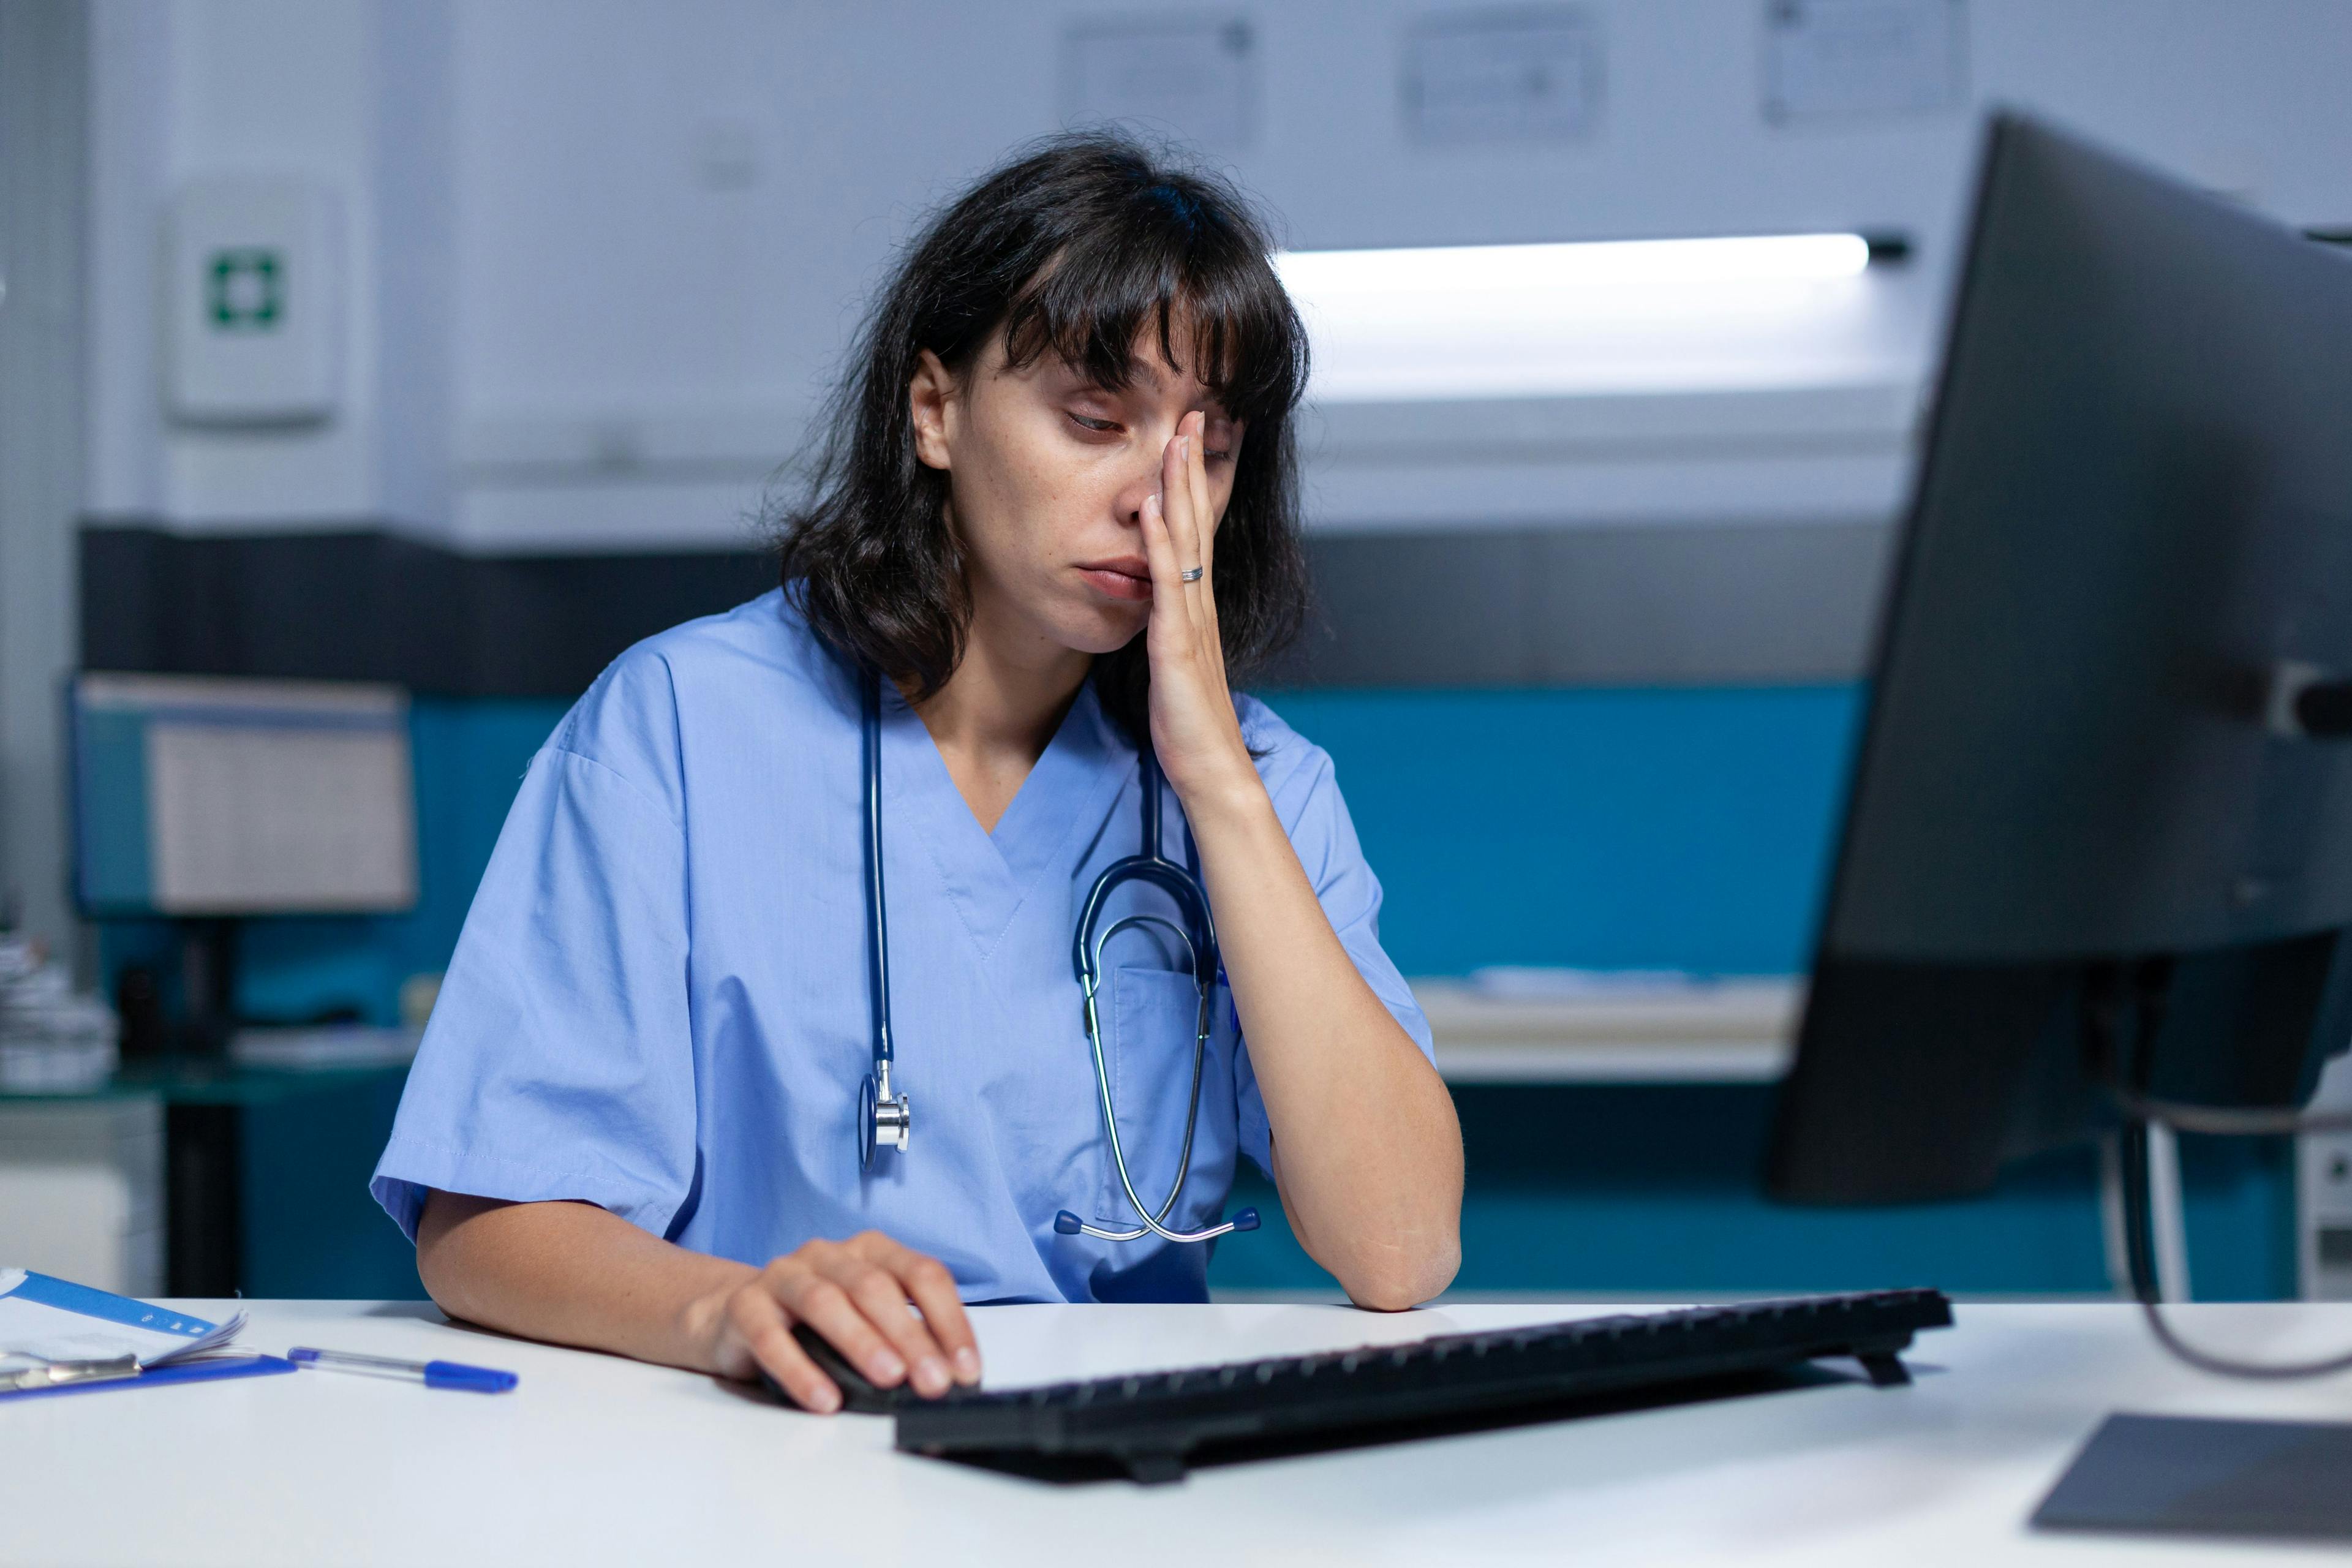 With Nurse Burnout at an All-Time High, Offer Tangible Relief